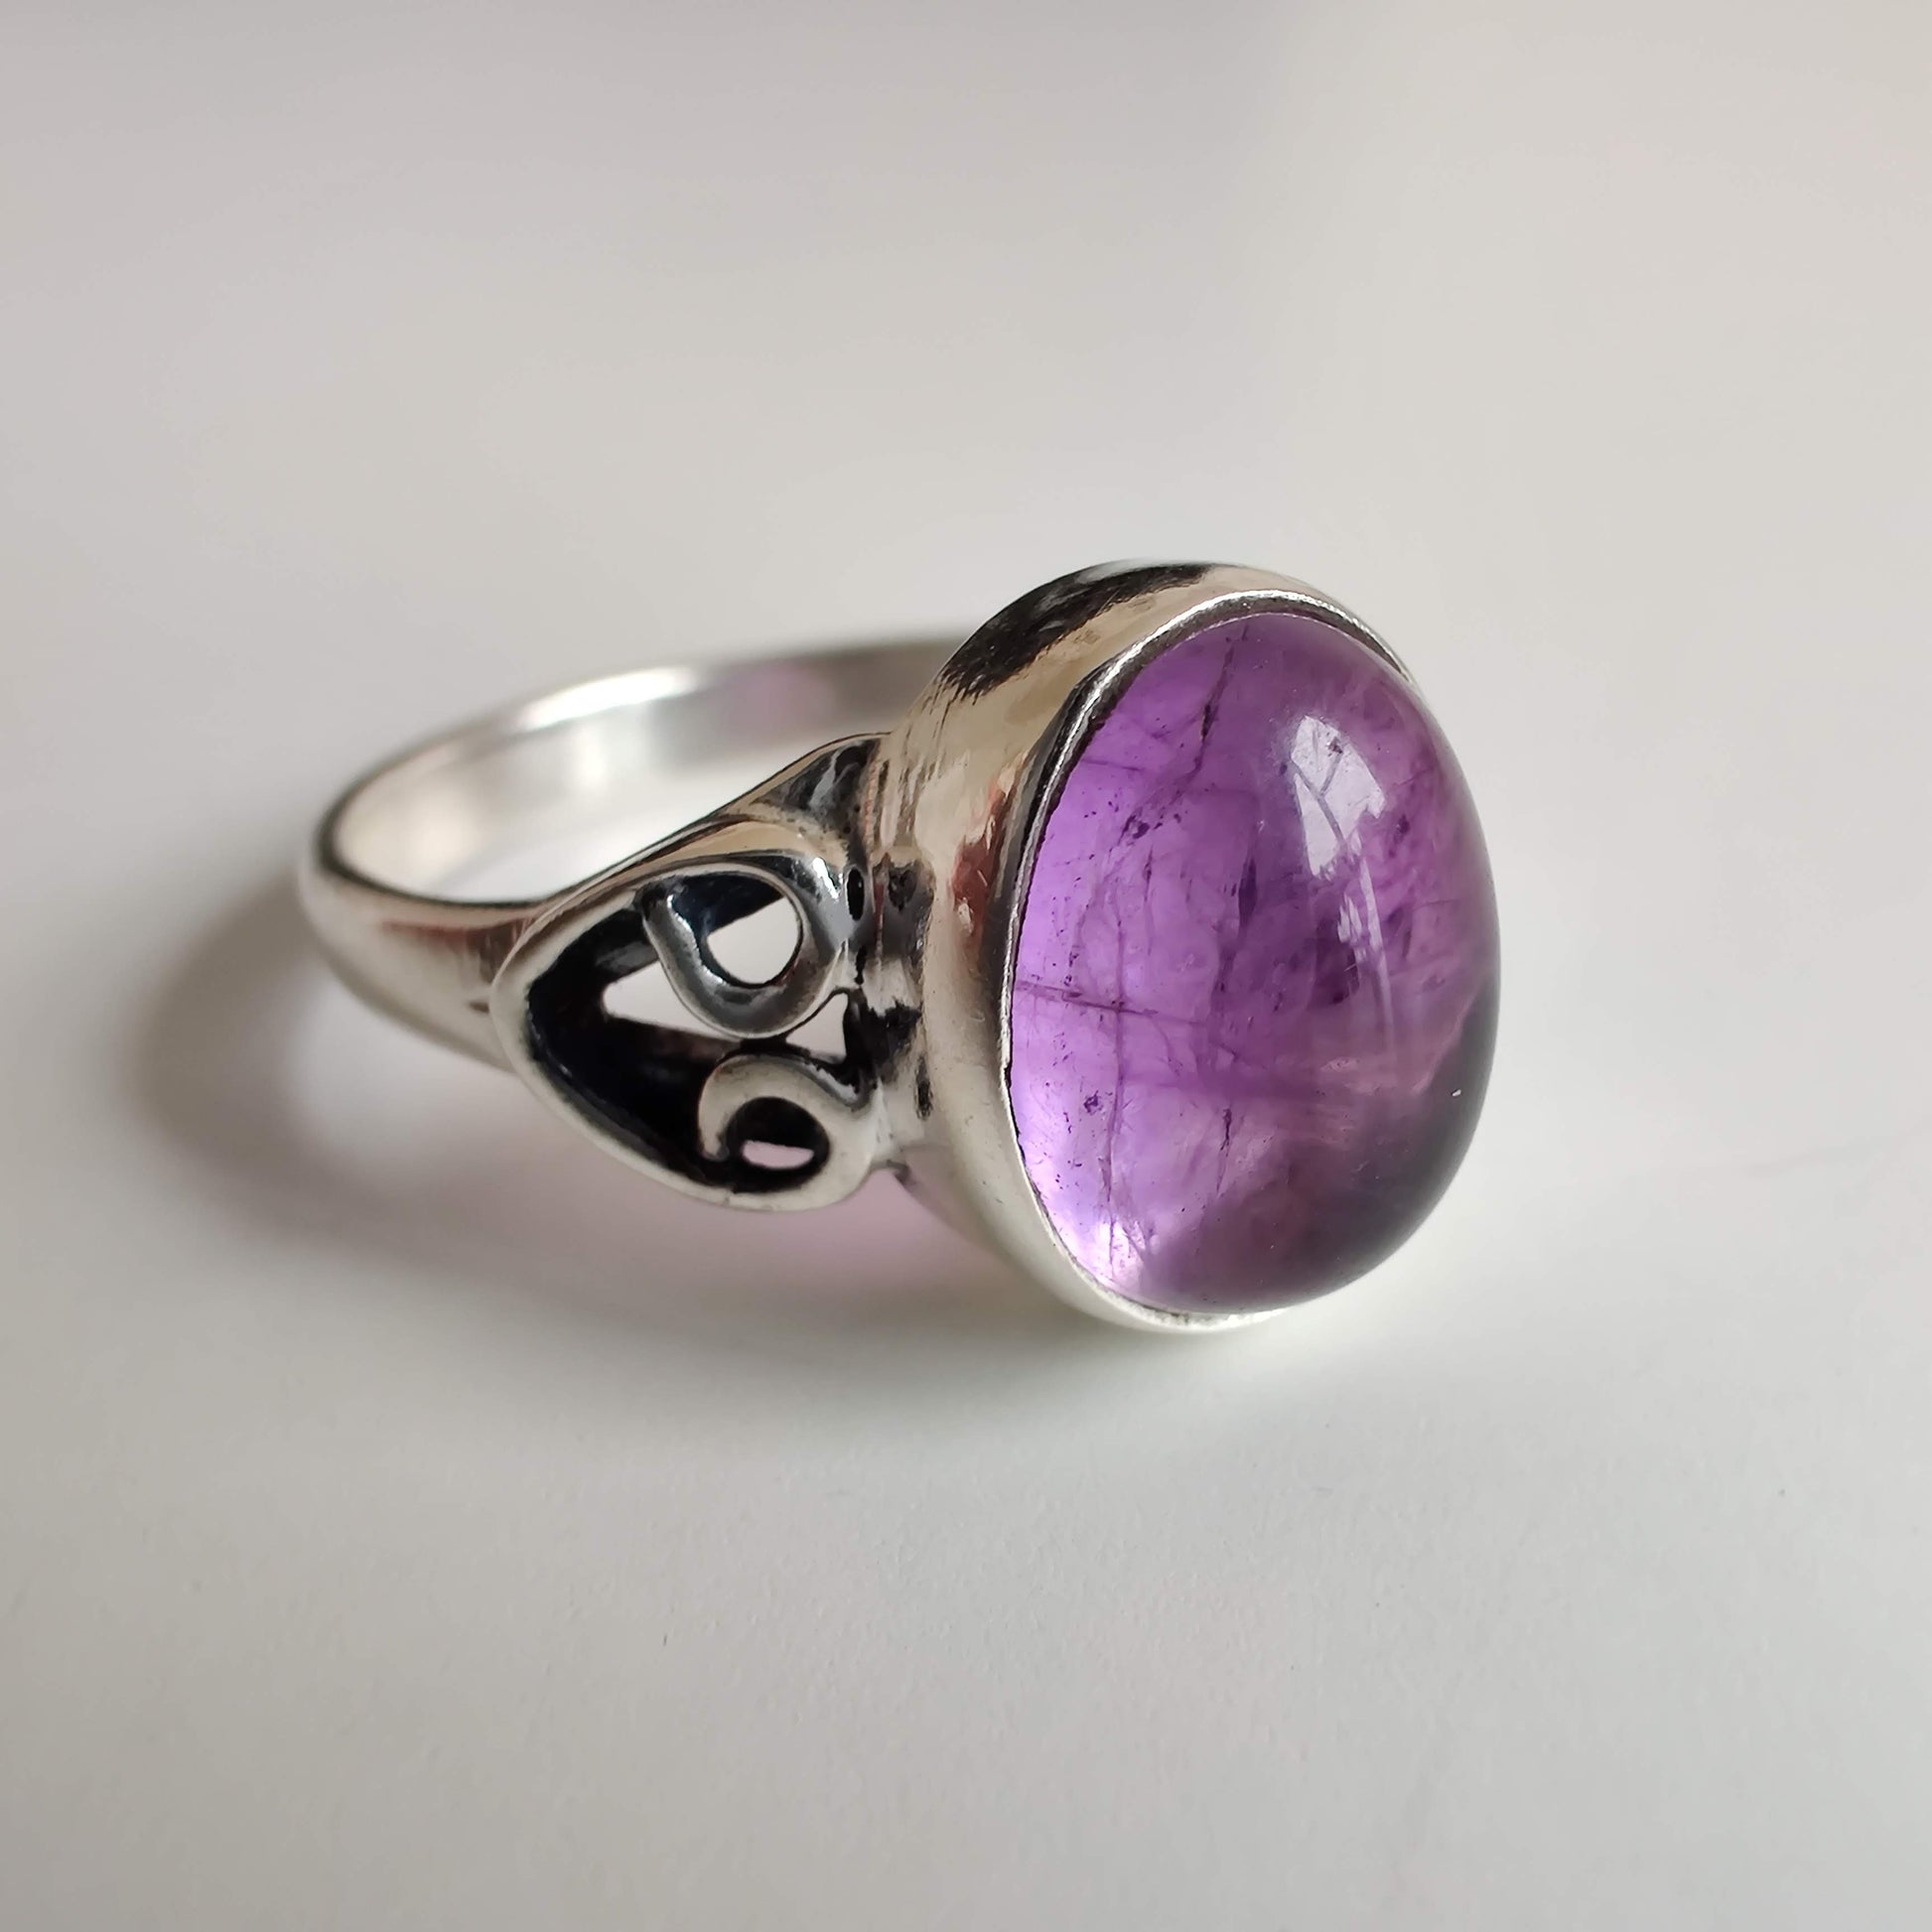 Amethyst Oval 925 Sterling Silver Ring with Heart Design - Rivendell Shop